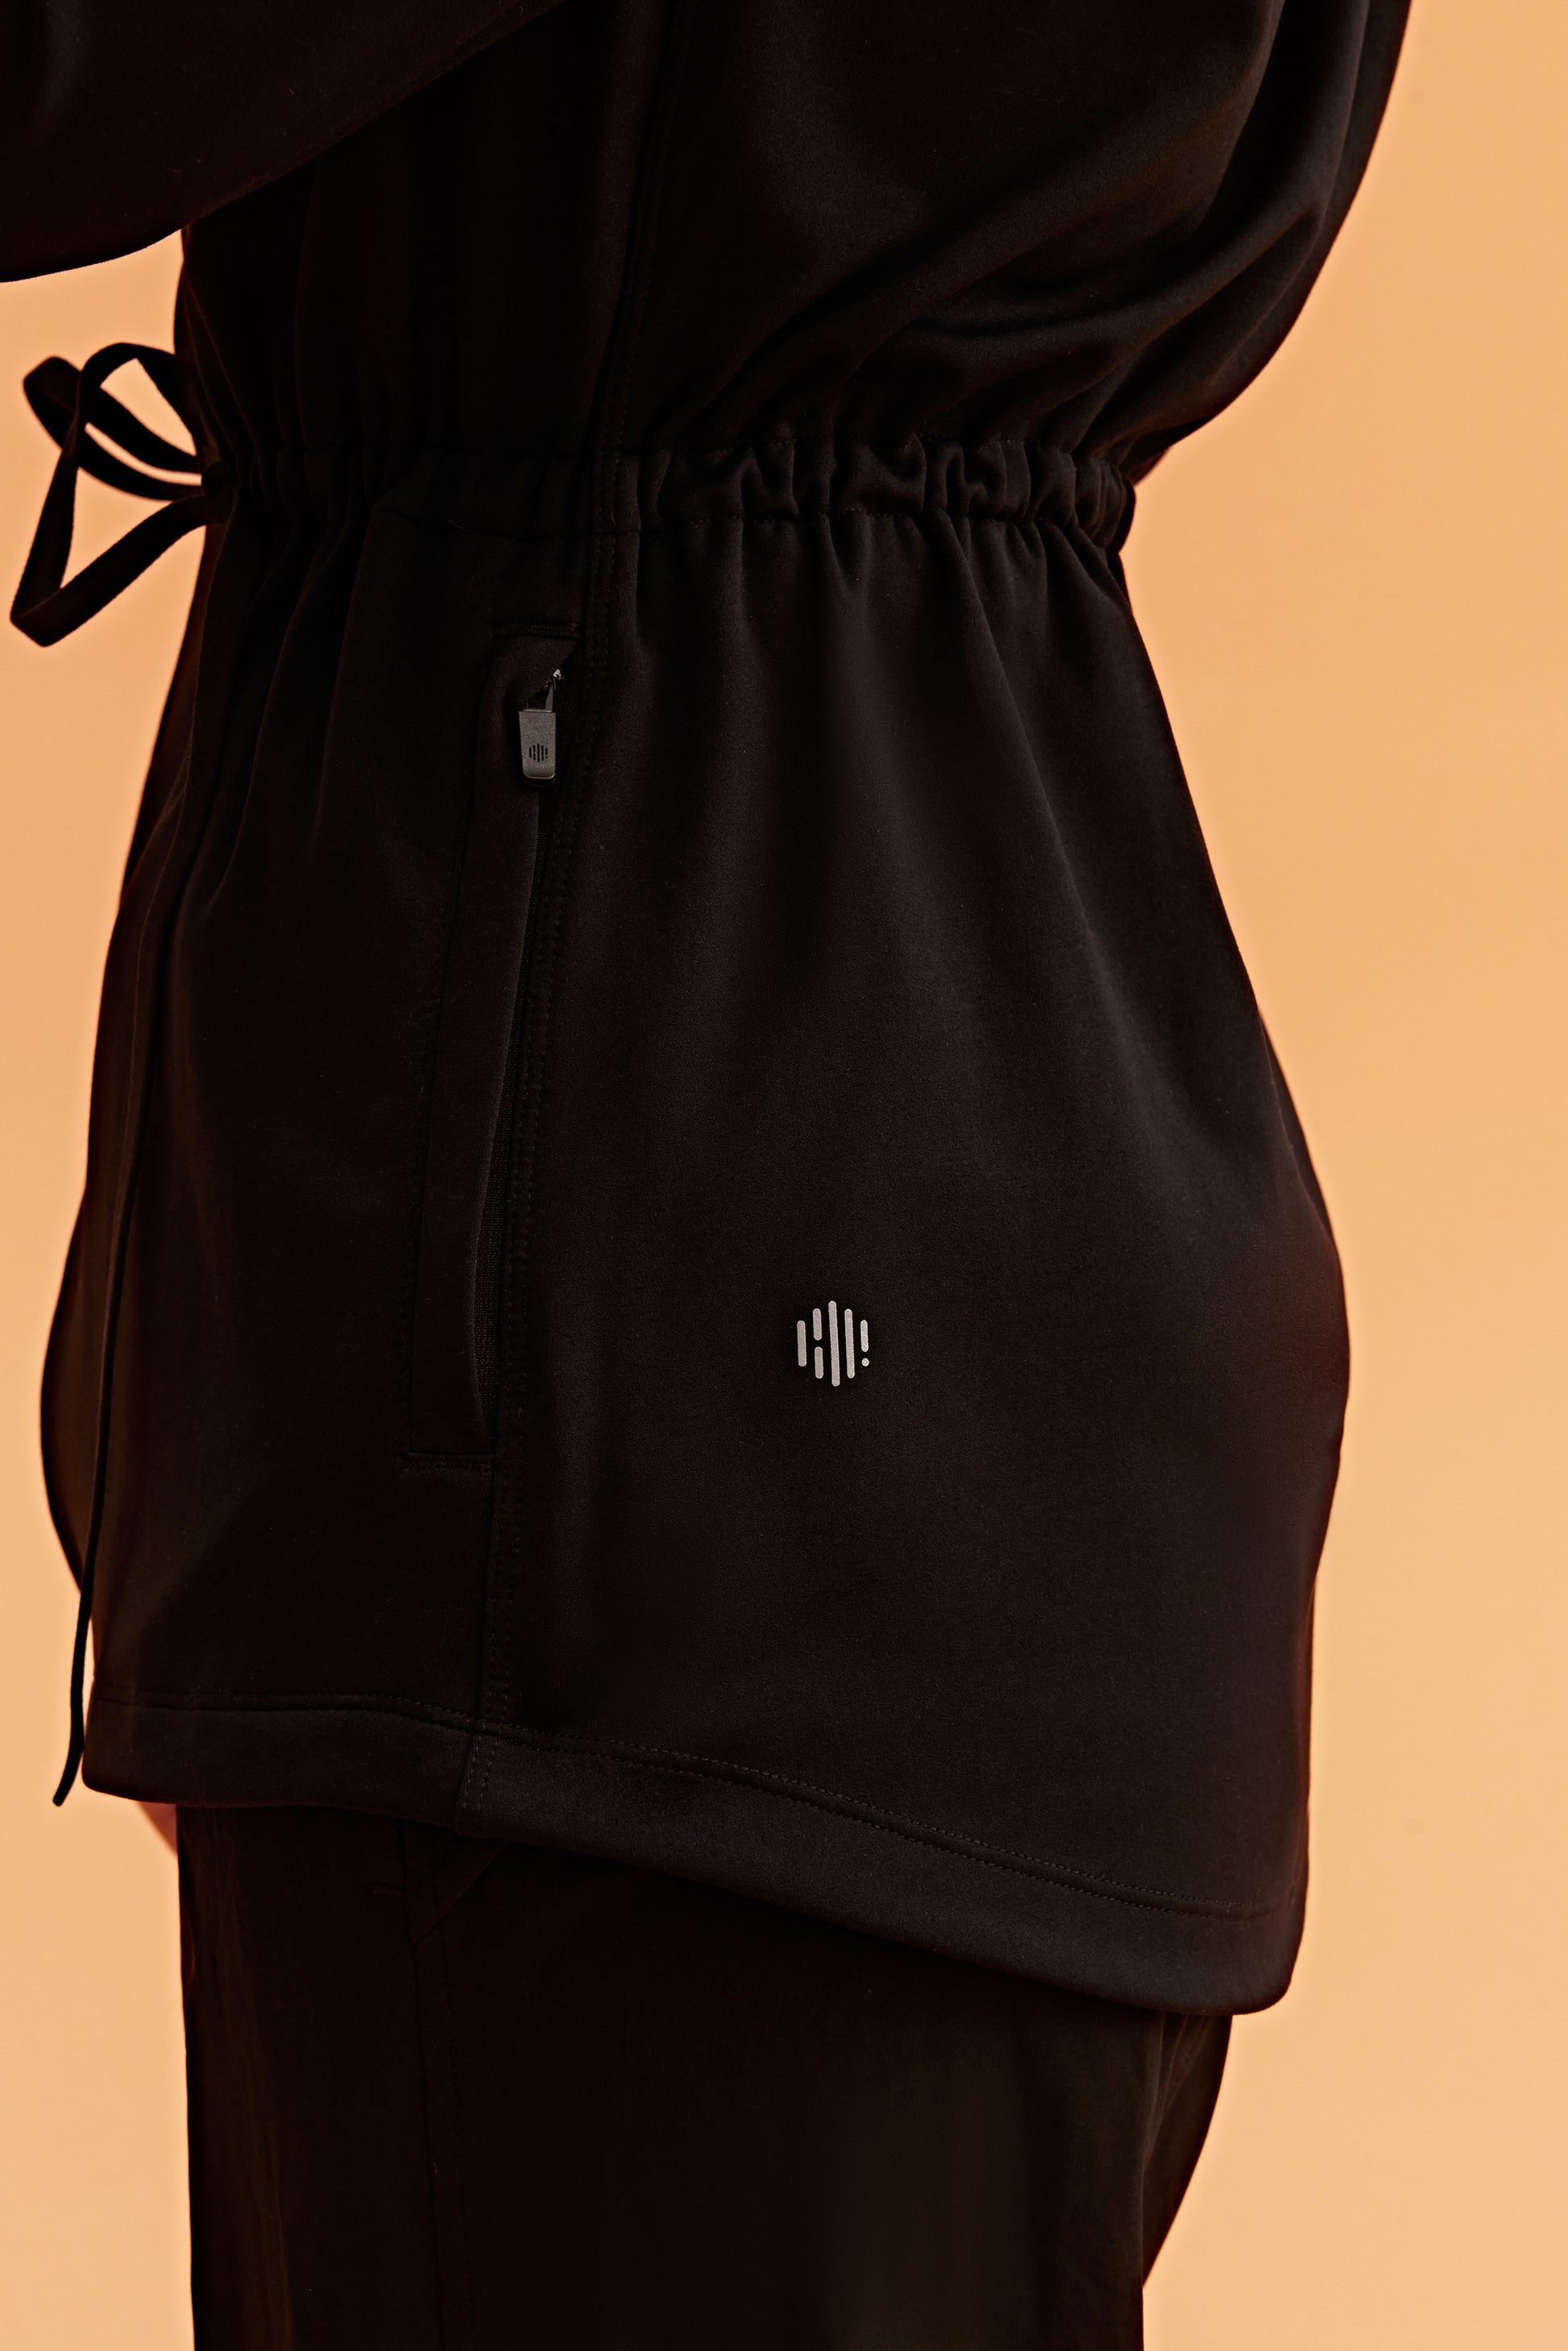 detail shot of the black hooded jacket shown neiwai active logo